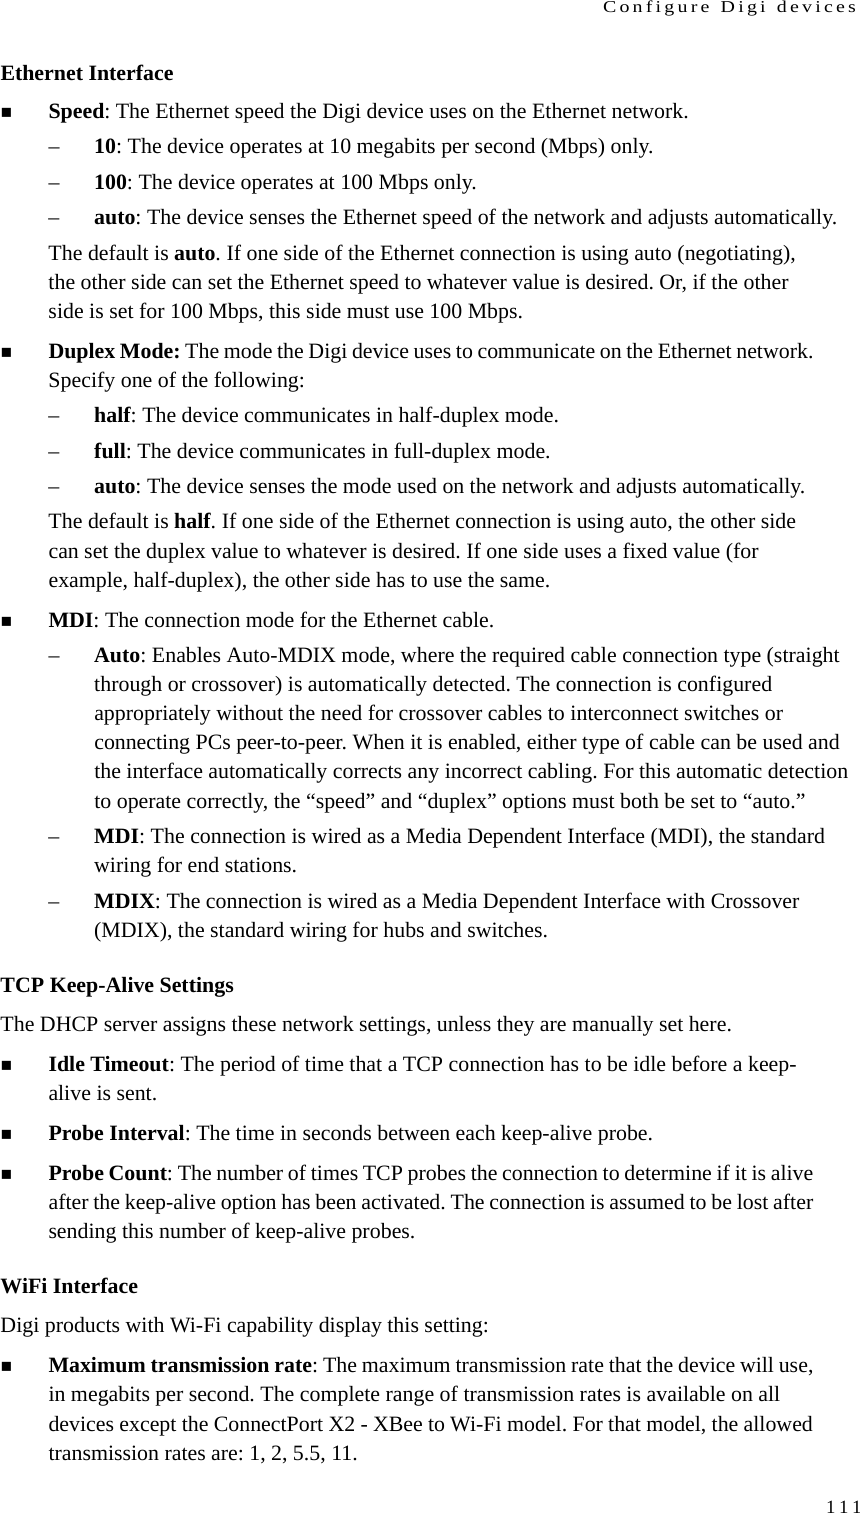 Configure Digi devices111Ethernet InterfaceSpeed: The Ethernet speed the Digi device uses on the Ethernet network.–10: The device operates at 10 megabits per second (Mbps) only.–100: The device operates at 100 Mbps only.–auto: The device senses the Ethernet speed of the network and adjusts automatically.The default is auto. If one side of the Ethernet connection is using auto (negotiating), the other side can set the Ethernet speed to whatever value is desired. Or, if the other side is set for 100 Mbps, this side must use 100 Mbps.Duplex Mode: The mode the Digi device uses to communicate on the Ethernet network. Specify one of the following:–half: The device communicates in half-duplex mode.–full: The device communicates in full-duplex mode.–auto: The device senses the mode used on the network and adjusts automatically.The default is half. If one side of the Ethernet connection is using auto, the other side can set the duplex value to whatever is desired. If one side uses a fixed value (for example, half-duplex), the other side has to use the same.MDI: The connection mode for the Ethernet cable.–Auto: Enables Auto-MDIX mode, where the required cable connection type (straight through or crossover) is automatically detected. The connection is configured appropriately without the need for crossover cables to interconnect switches or connecting PCs peer-to-peer. When it is enabled, either type of cable can be used and the interface automatically corrects any incorrect cabling. For this automatic detection to operate correctly, the “speed” and “duplex” options must both be set to “auto.”–MDI: The connection is wired as a Media Dependent Interface (MDI), the standard wiring for end stations.–MDIX: The connection is wired as a Media Dependent Interface with Crossover (MDIX), the standard wiring for hubs and switches.TCP Keep-Alive SettingsThe DHCP server assigns these network settings, unless they are manually set here.Idle Timeout: The period of time that a TCP connection has to be idle before a keep-alive is sent. Probe Interval: The time in seconds between each keep-alive probe. Probe Count: The number of times TCP probes the connection to determine if it is alive after the keep-alive option has been activated. The connection is assumed to be lost after sending this number of keep-alive probes. WiFi InterfaceDigi products with Wi-Fi capability display this setting:Maximum transmission rate: The maximum transmission rate that the device will use, in megabits per second. The complete range of transmission rates is available on all devices except the ConnectPort X2 - XBee to Wi-Fi model. For that model, the allowed transmission rates are: 1, 2, 5.5, 11.